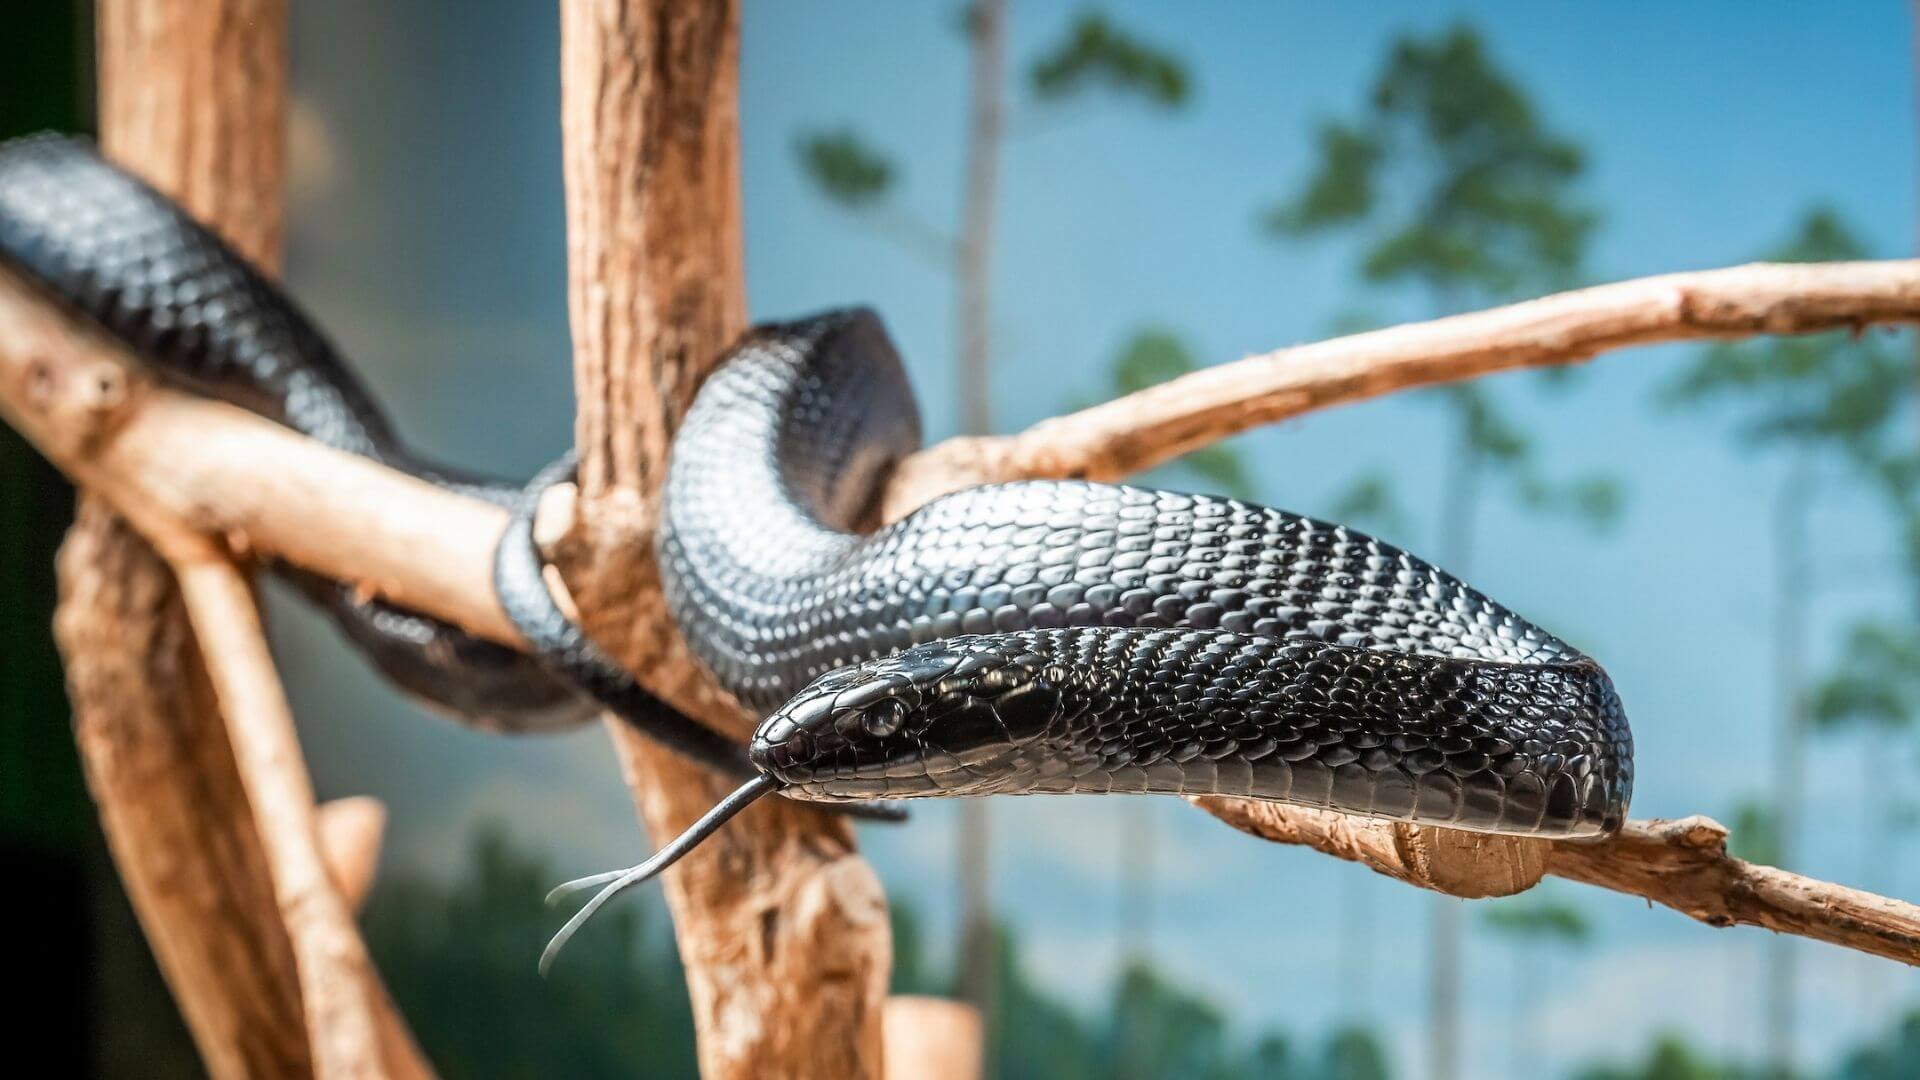 Can snakes be venomous and poisonous?